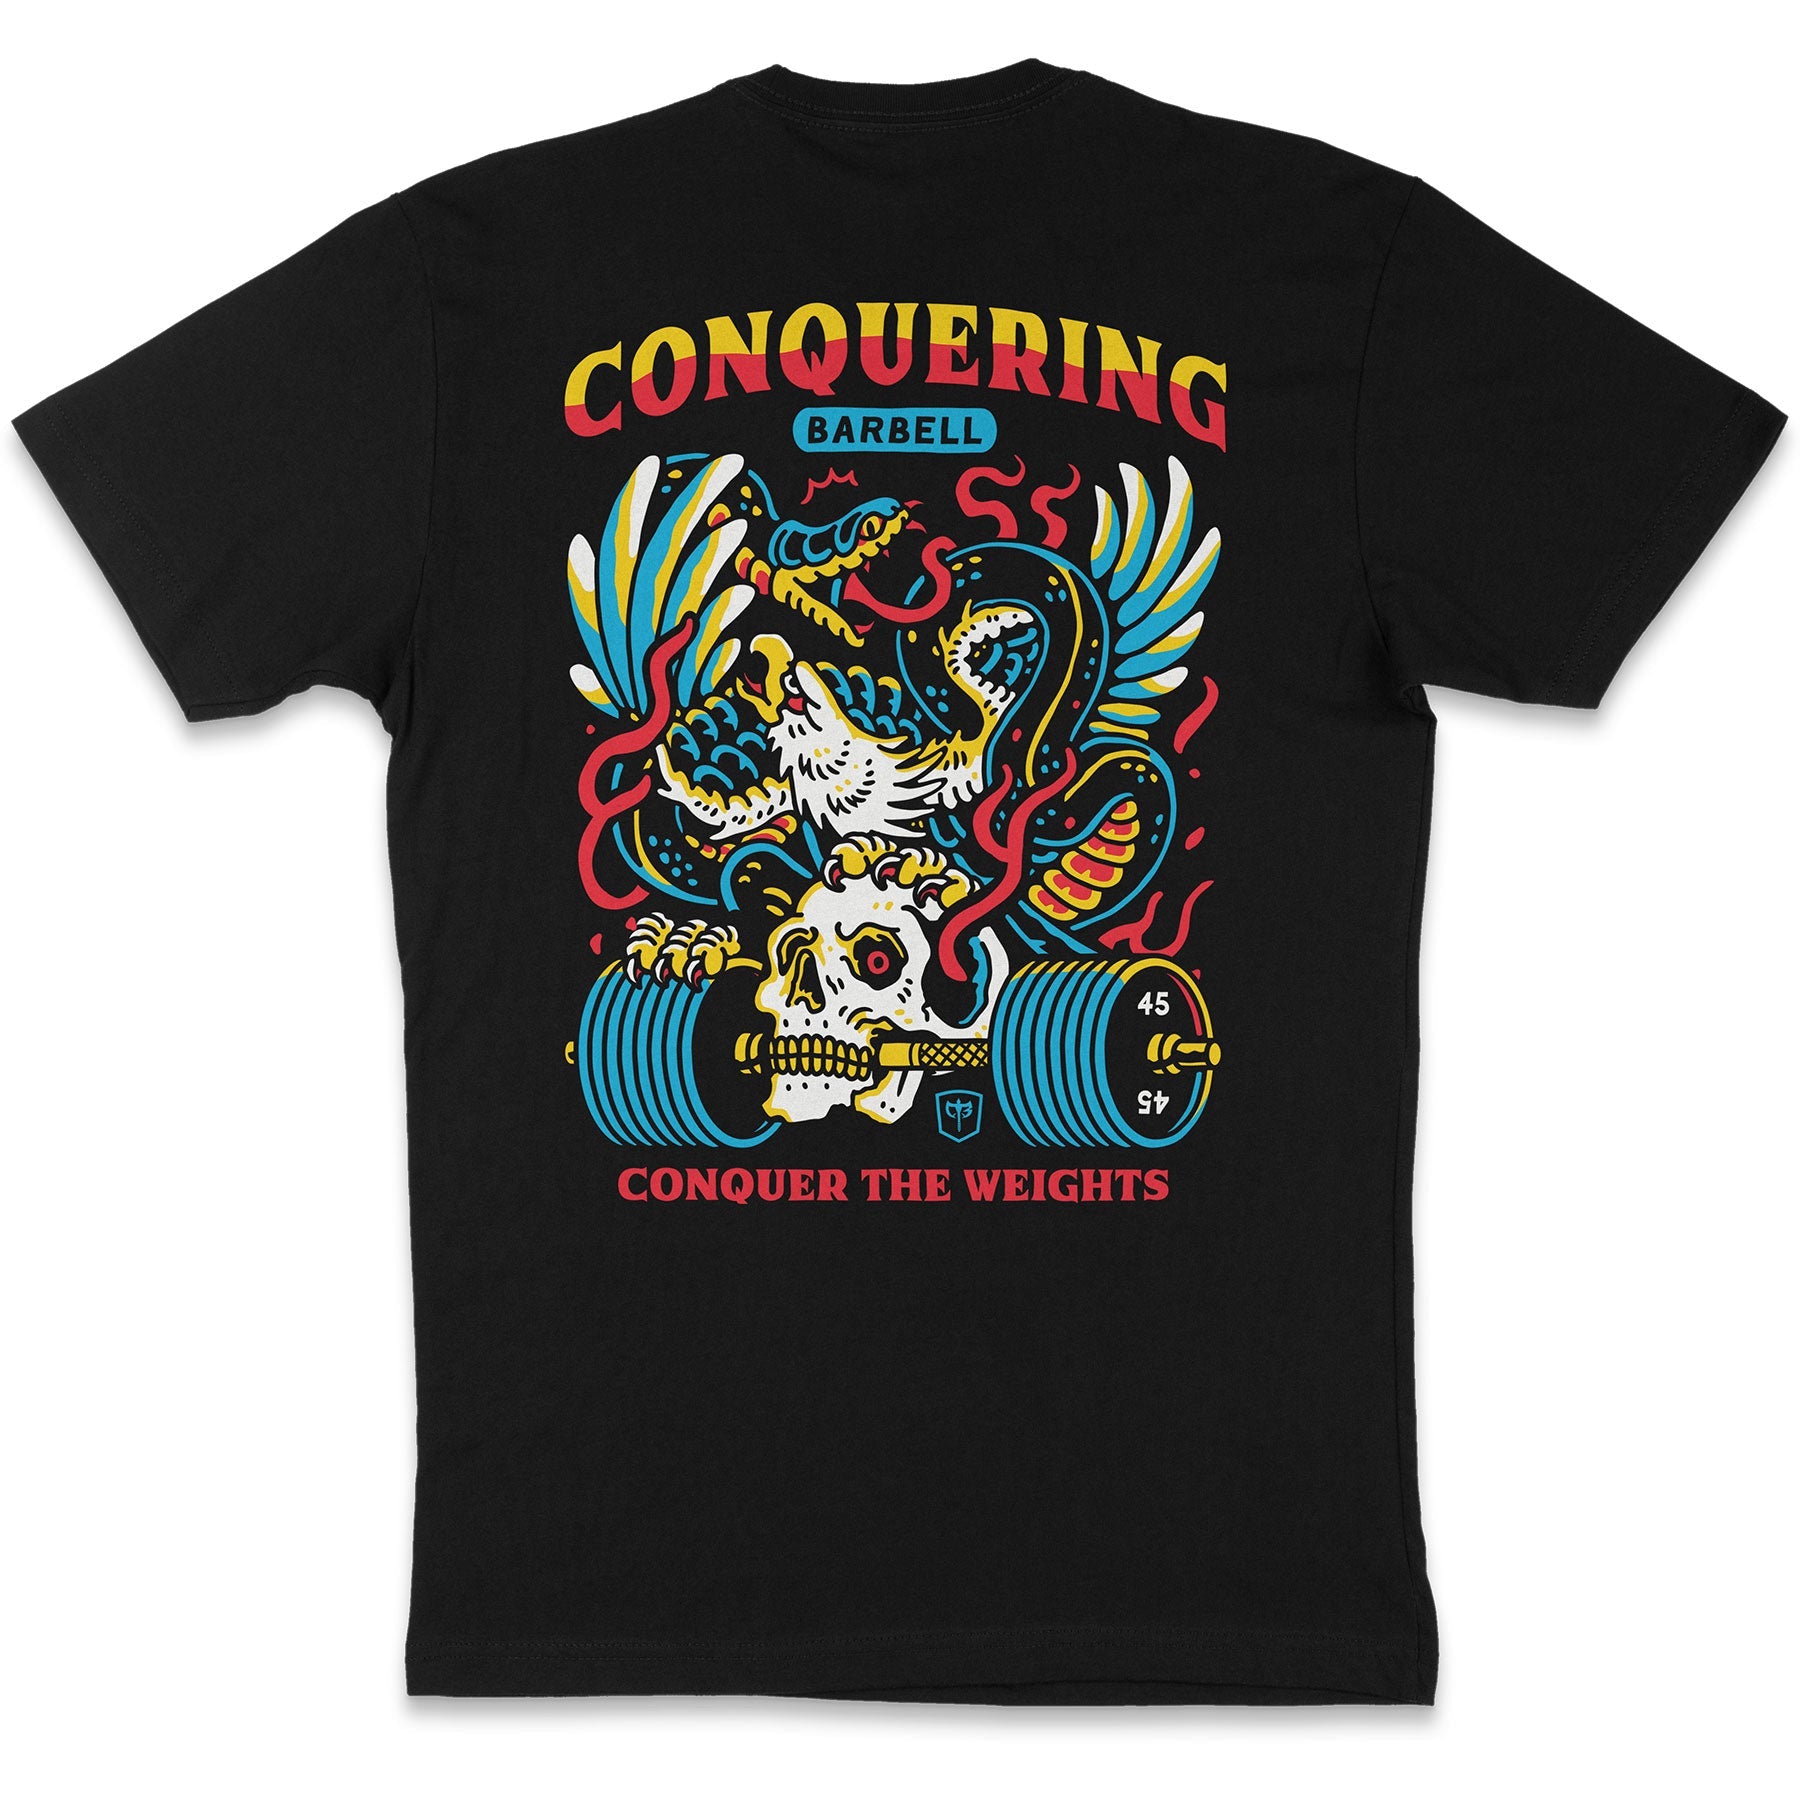 Conquer The Weights - Air Raid - on Black tank top - Conquering